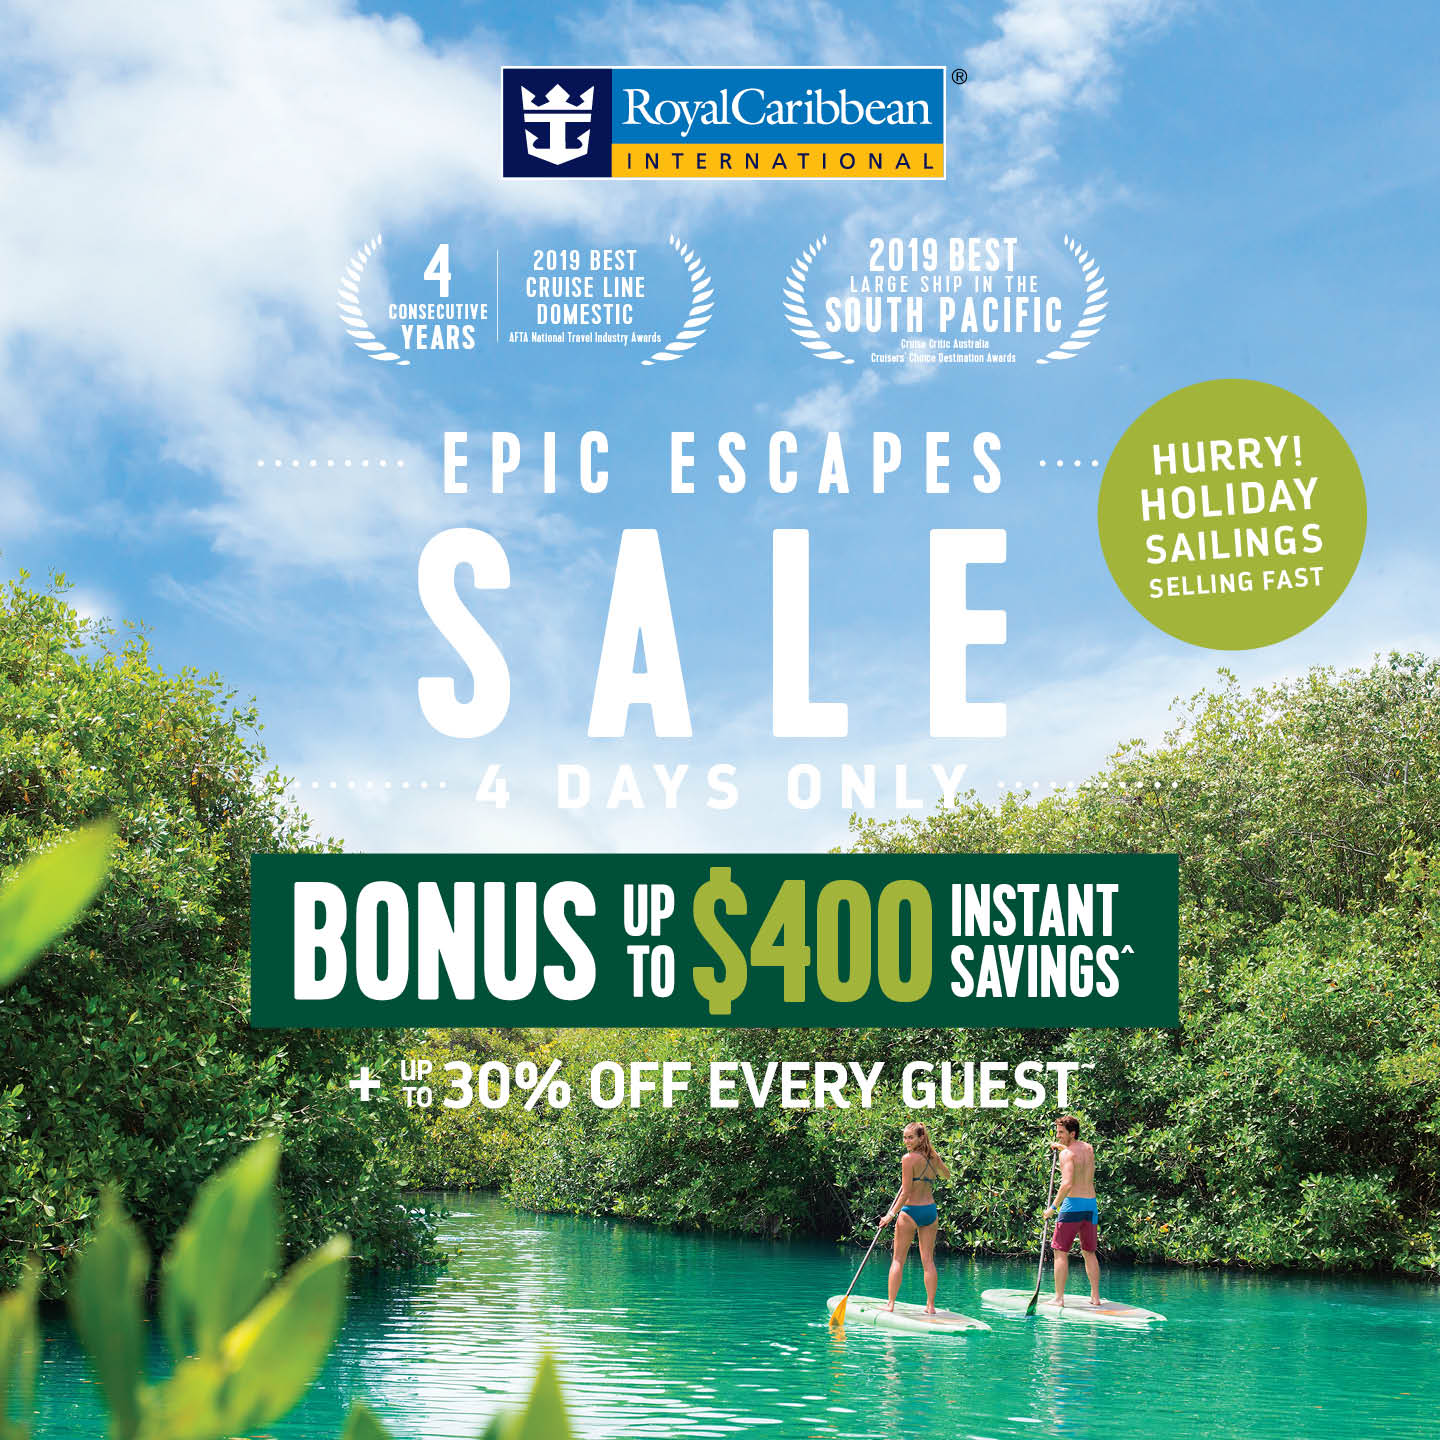 Royal Caribbean Cruise Deals | The best cruise bargains on Royal